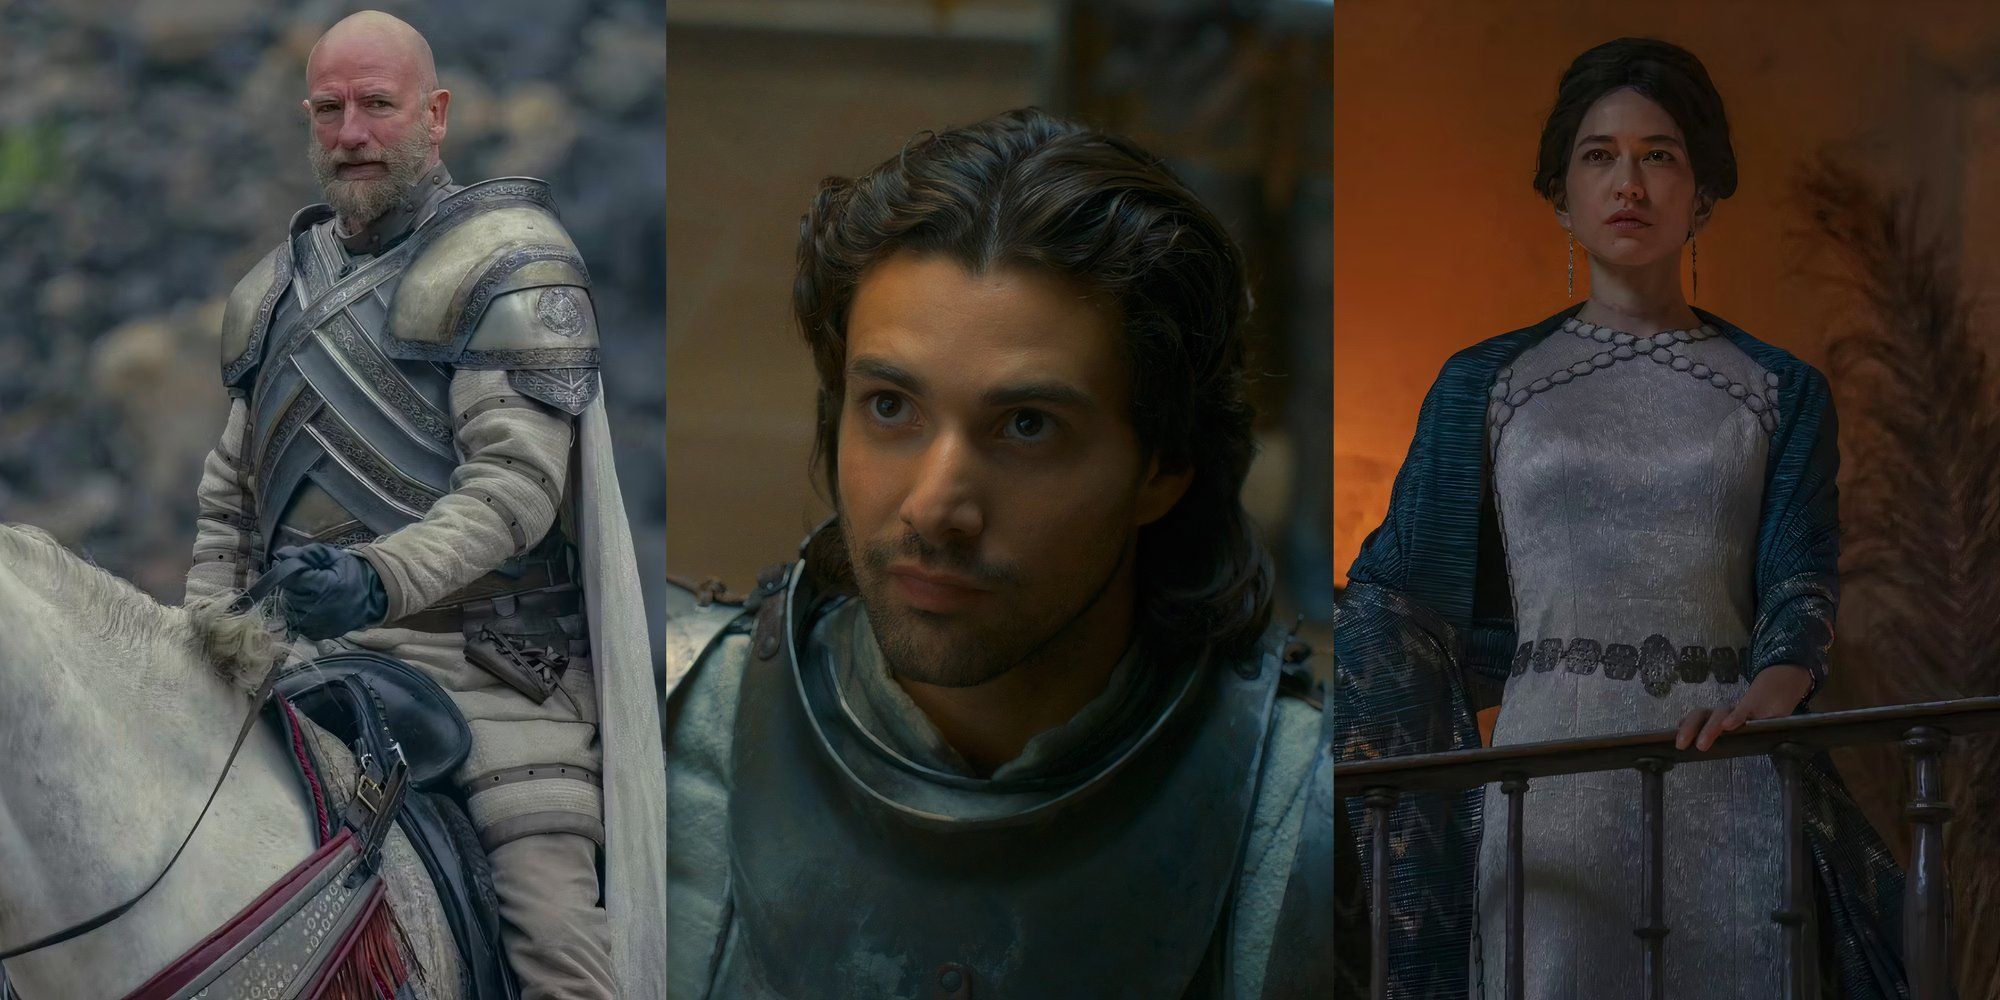 Harrold Westerling riding a horse, Criston Cole being selected by Rhaenyra Targaryen, and Mysaria in House of the Dragon